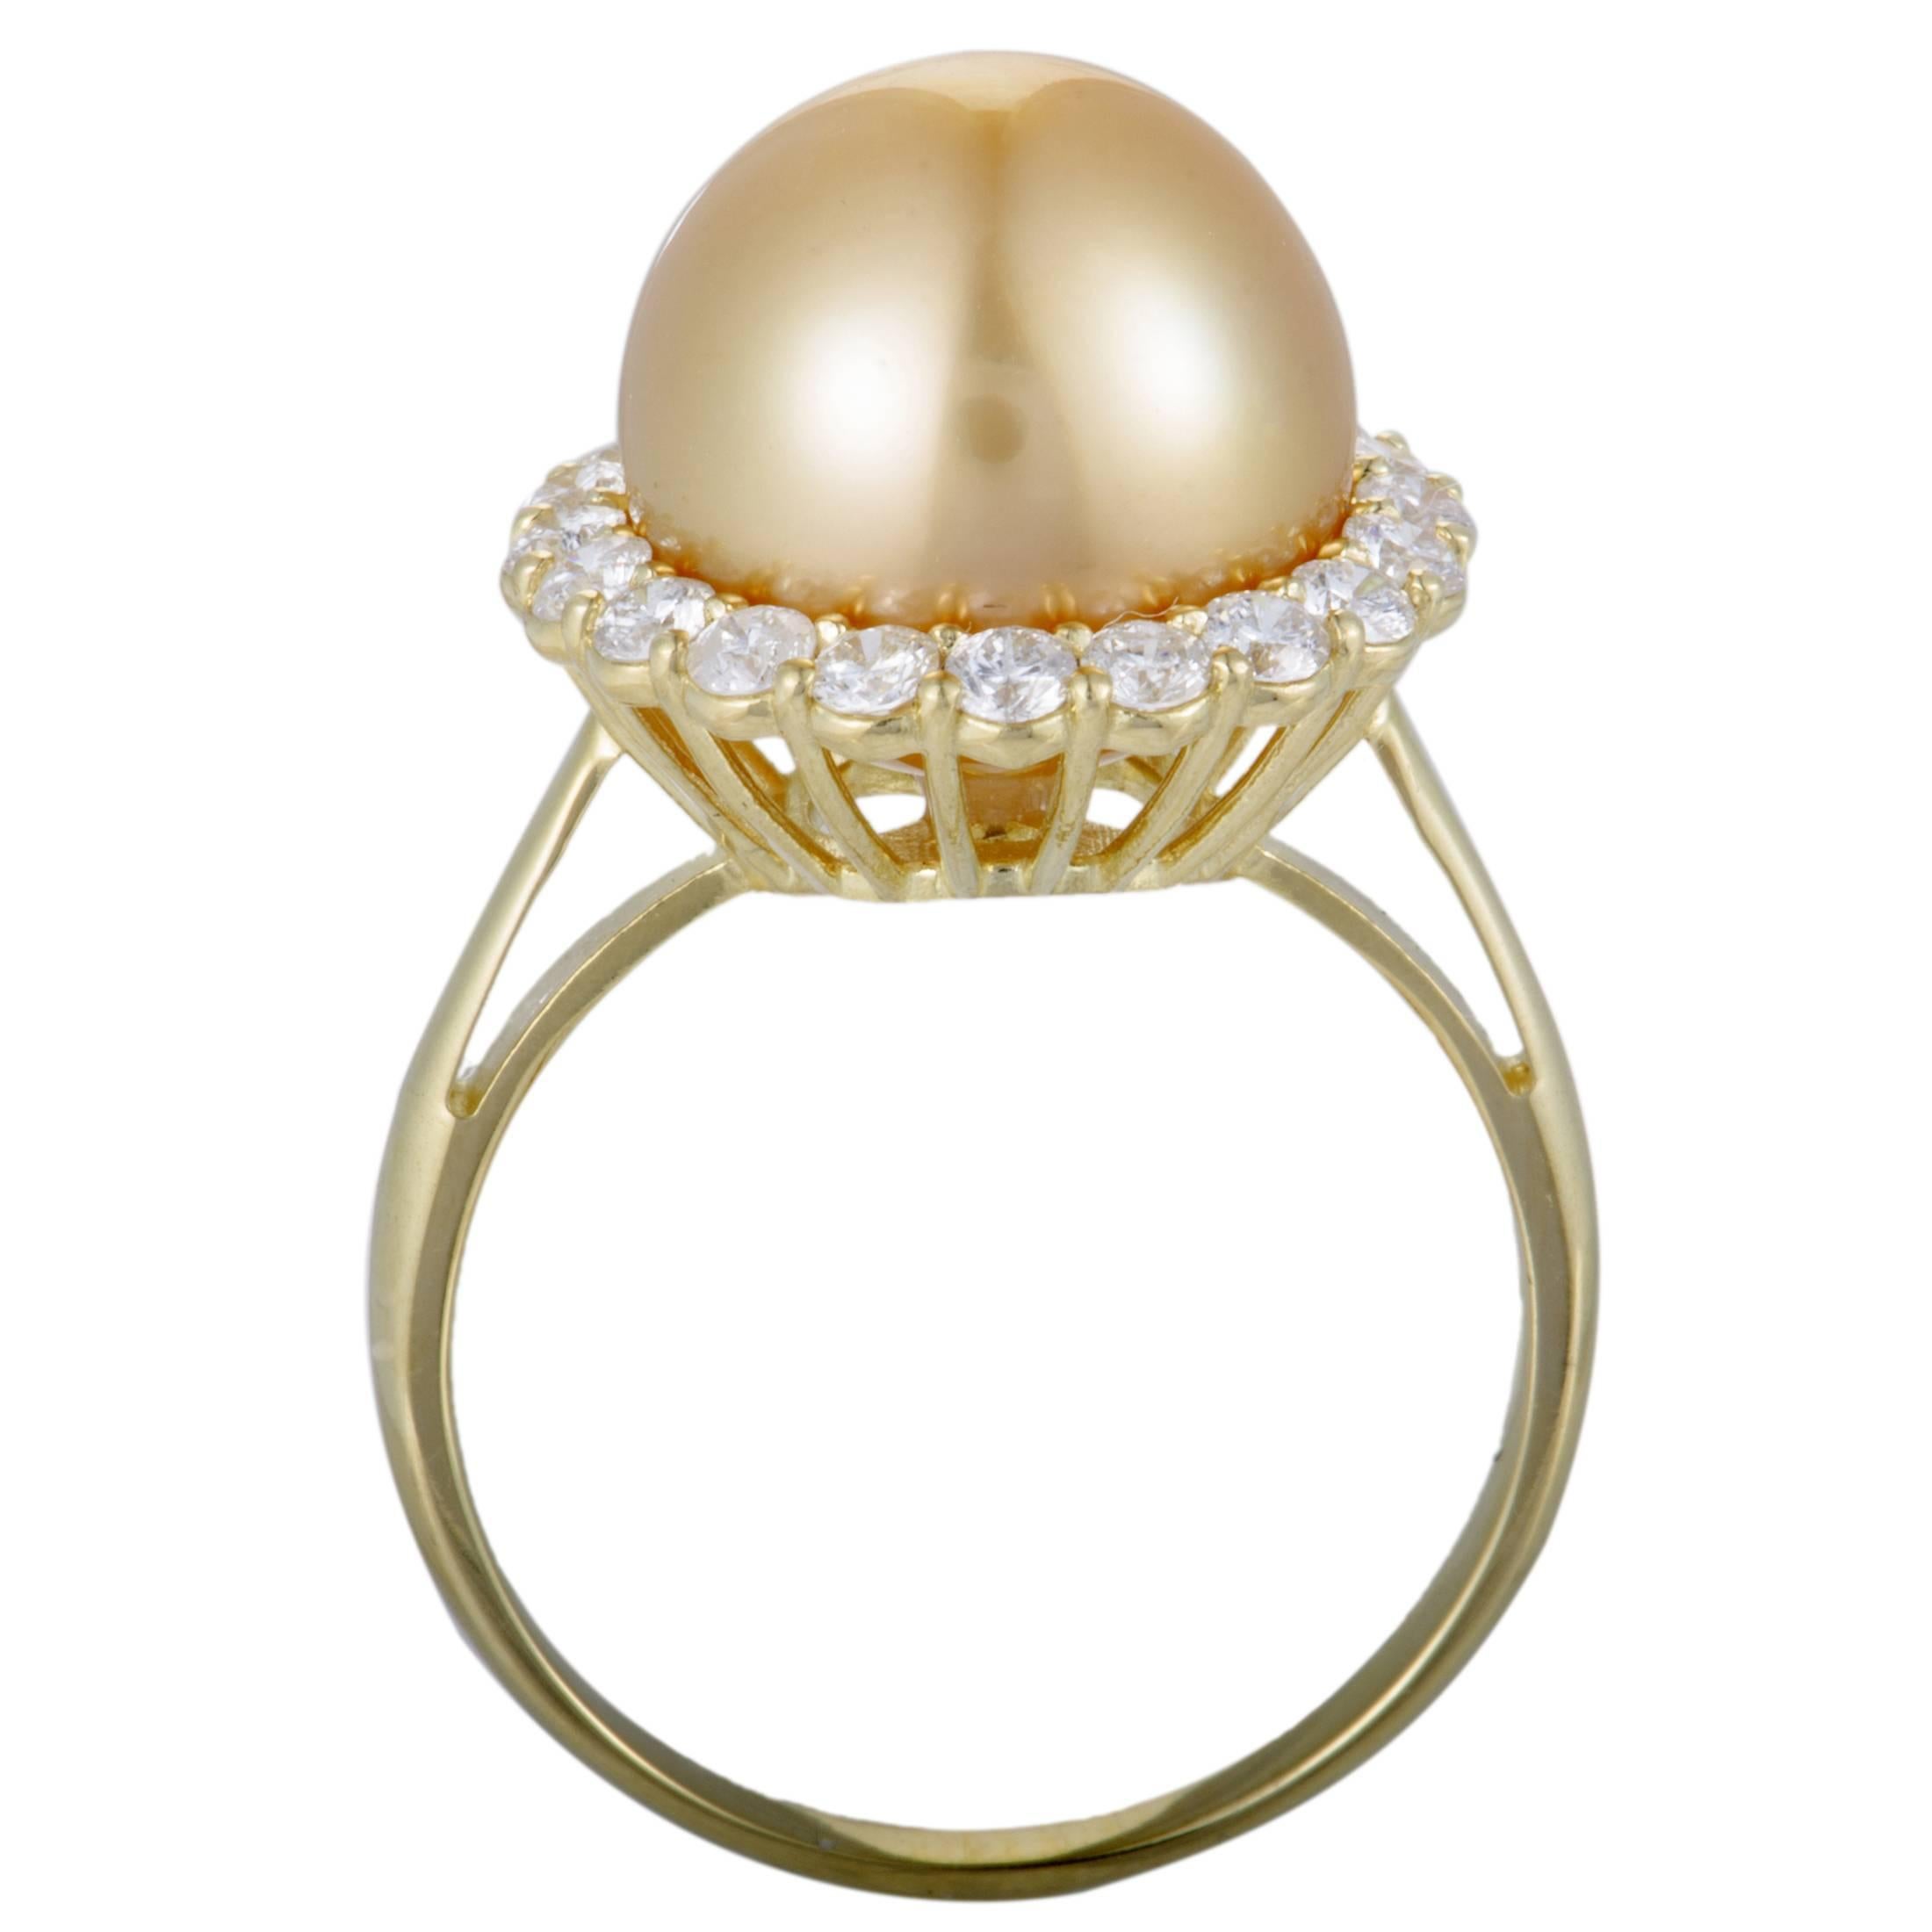 Magnificently designed and gracefully decorated, this 18K yellow gold ring boasts an exceptionally prestigious and refined appeal. The beautiful ring is adorned with an elegant golden pearl of 11.8mm surrounded by 0.70ct of sparkling diamonds that